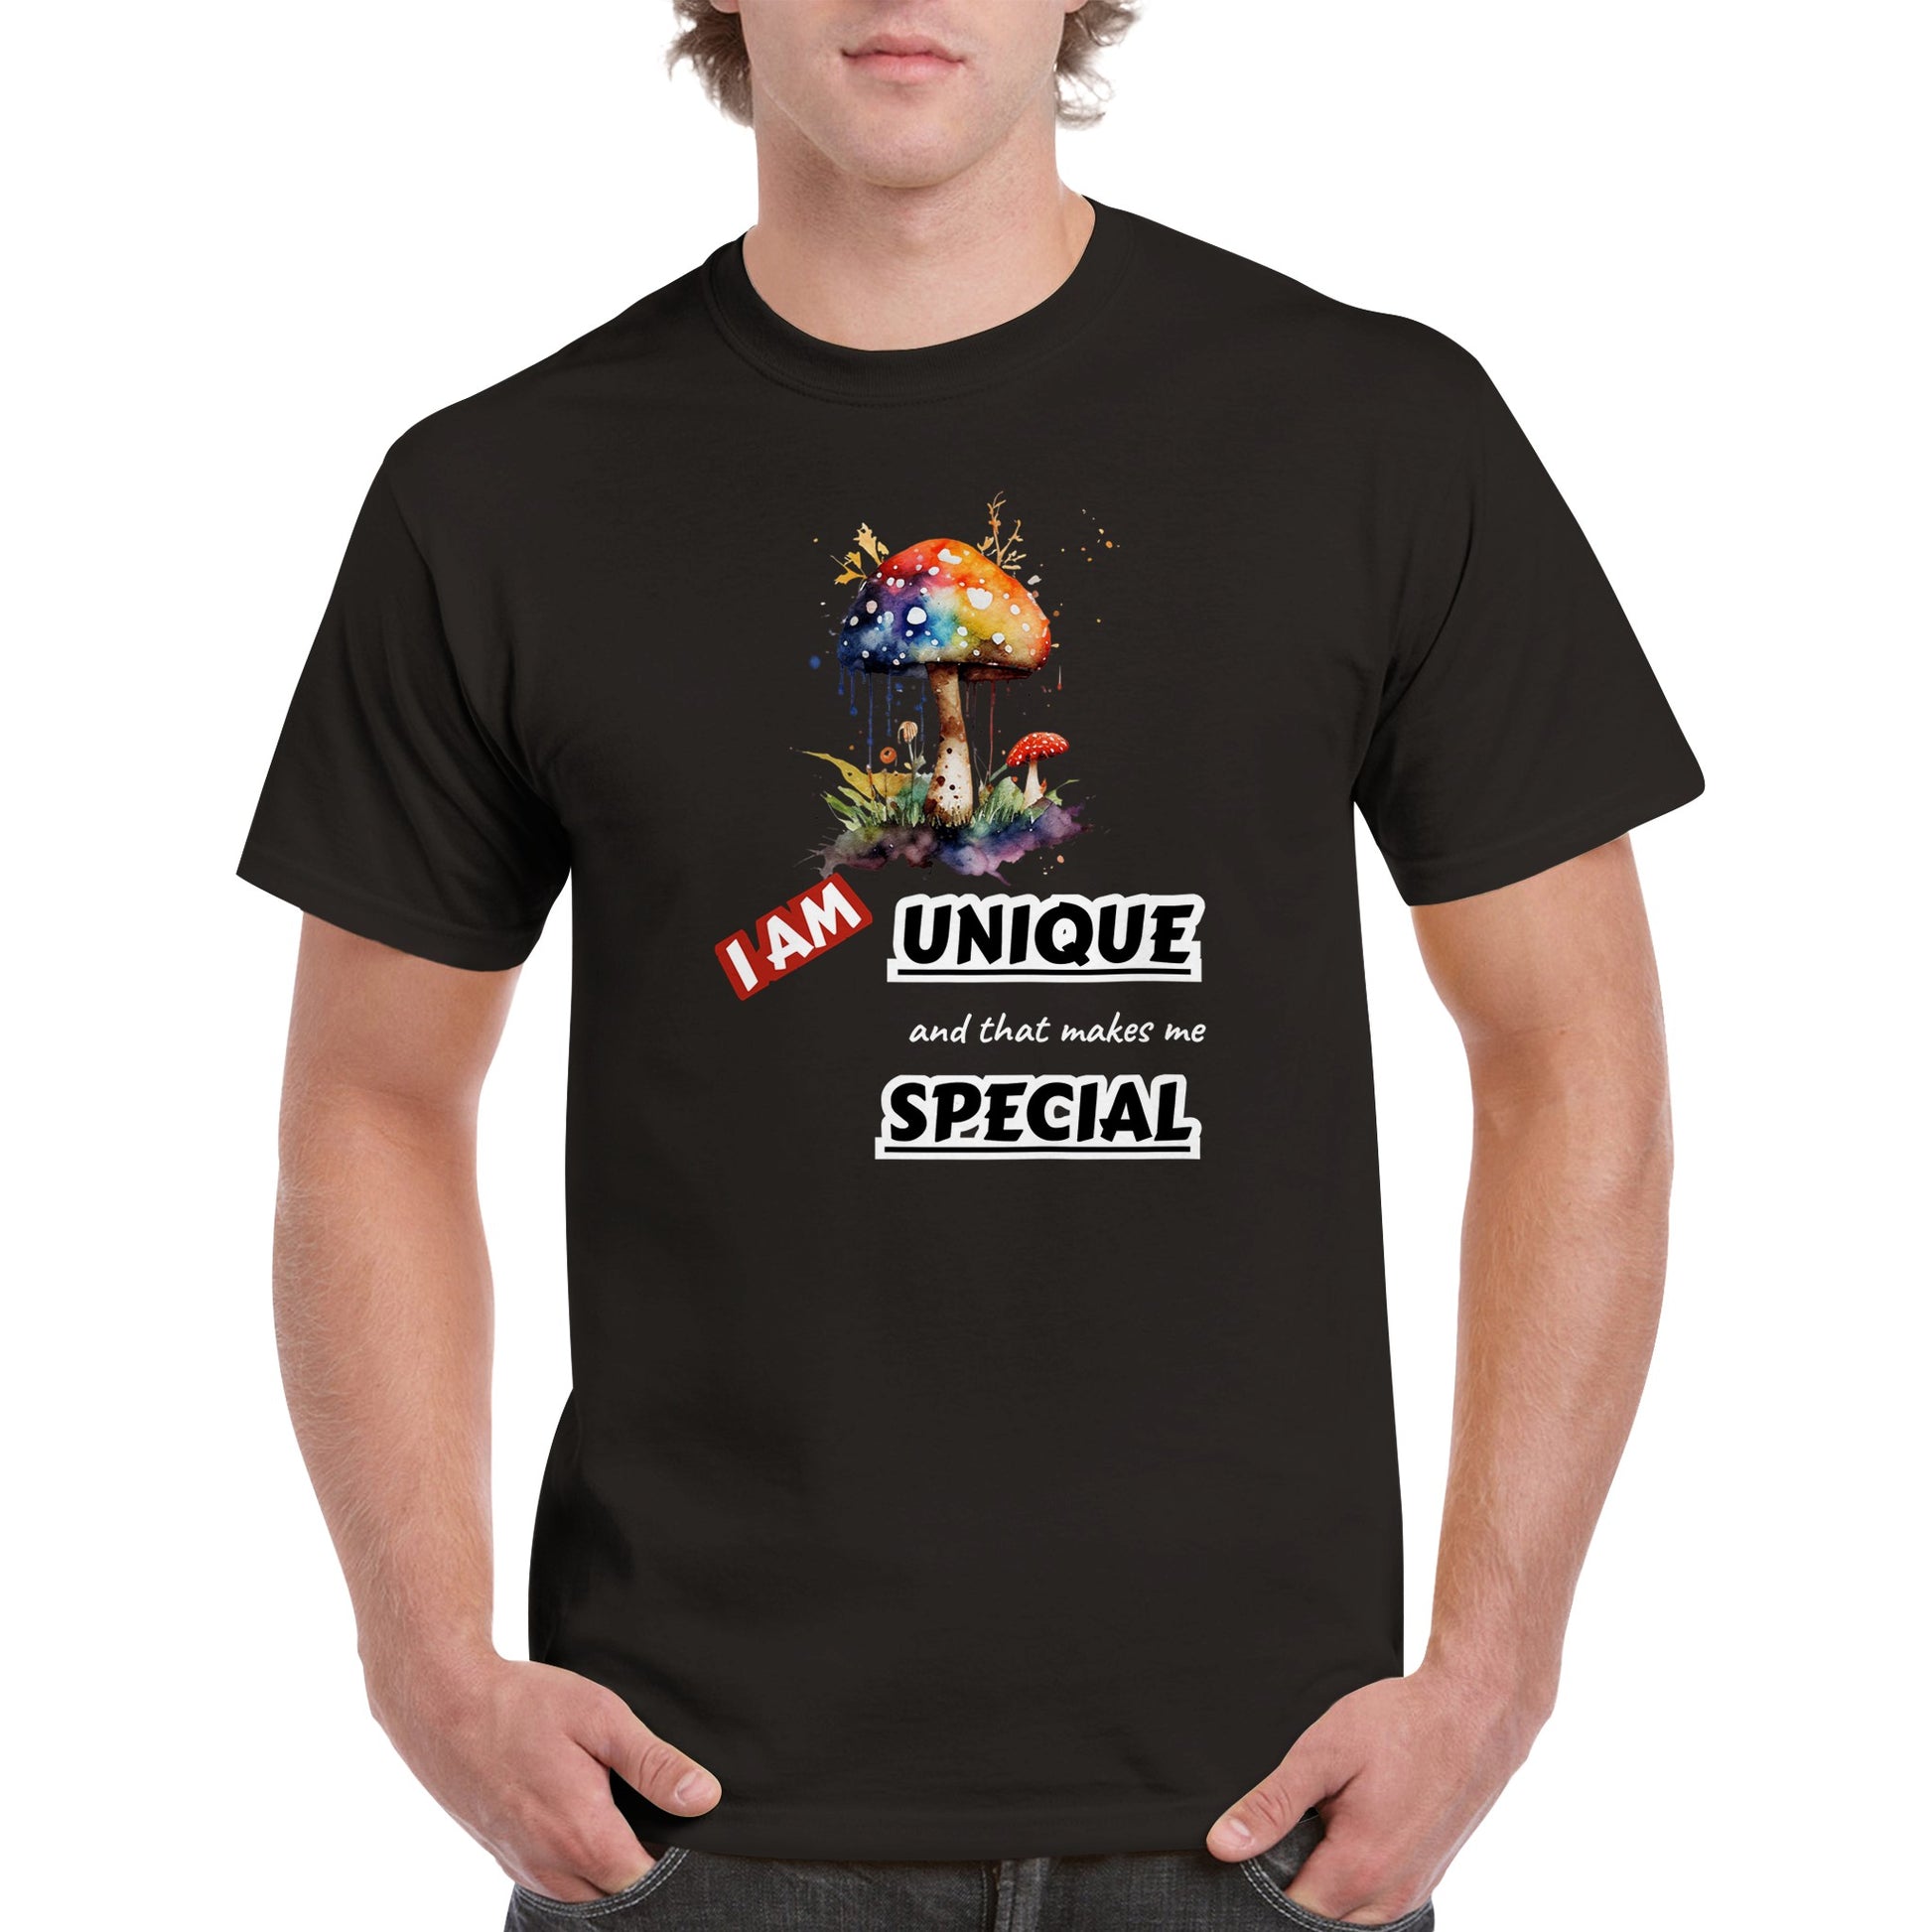 I AM UNIQUE, AND THAT MAKES ME SPECIAL - INSPIRATIONAL QUOTES FASHION COLOURFUL PICTURE OF A MUSHROOM. FOE  MEN AND WOMEN - BLACK T-SHIRT